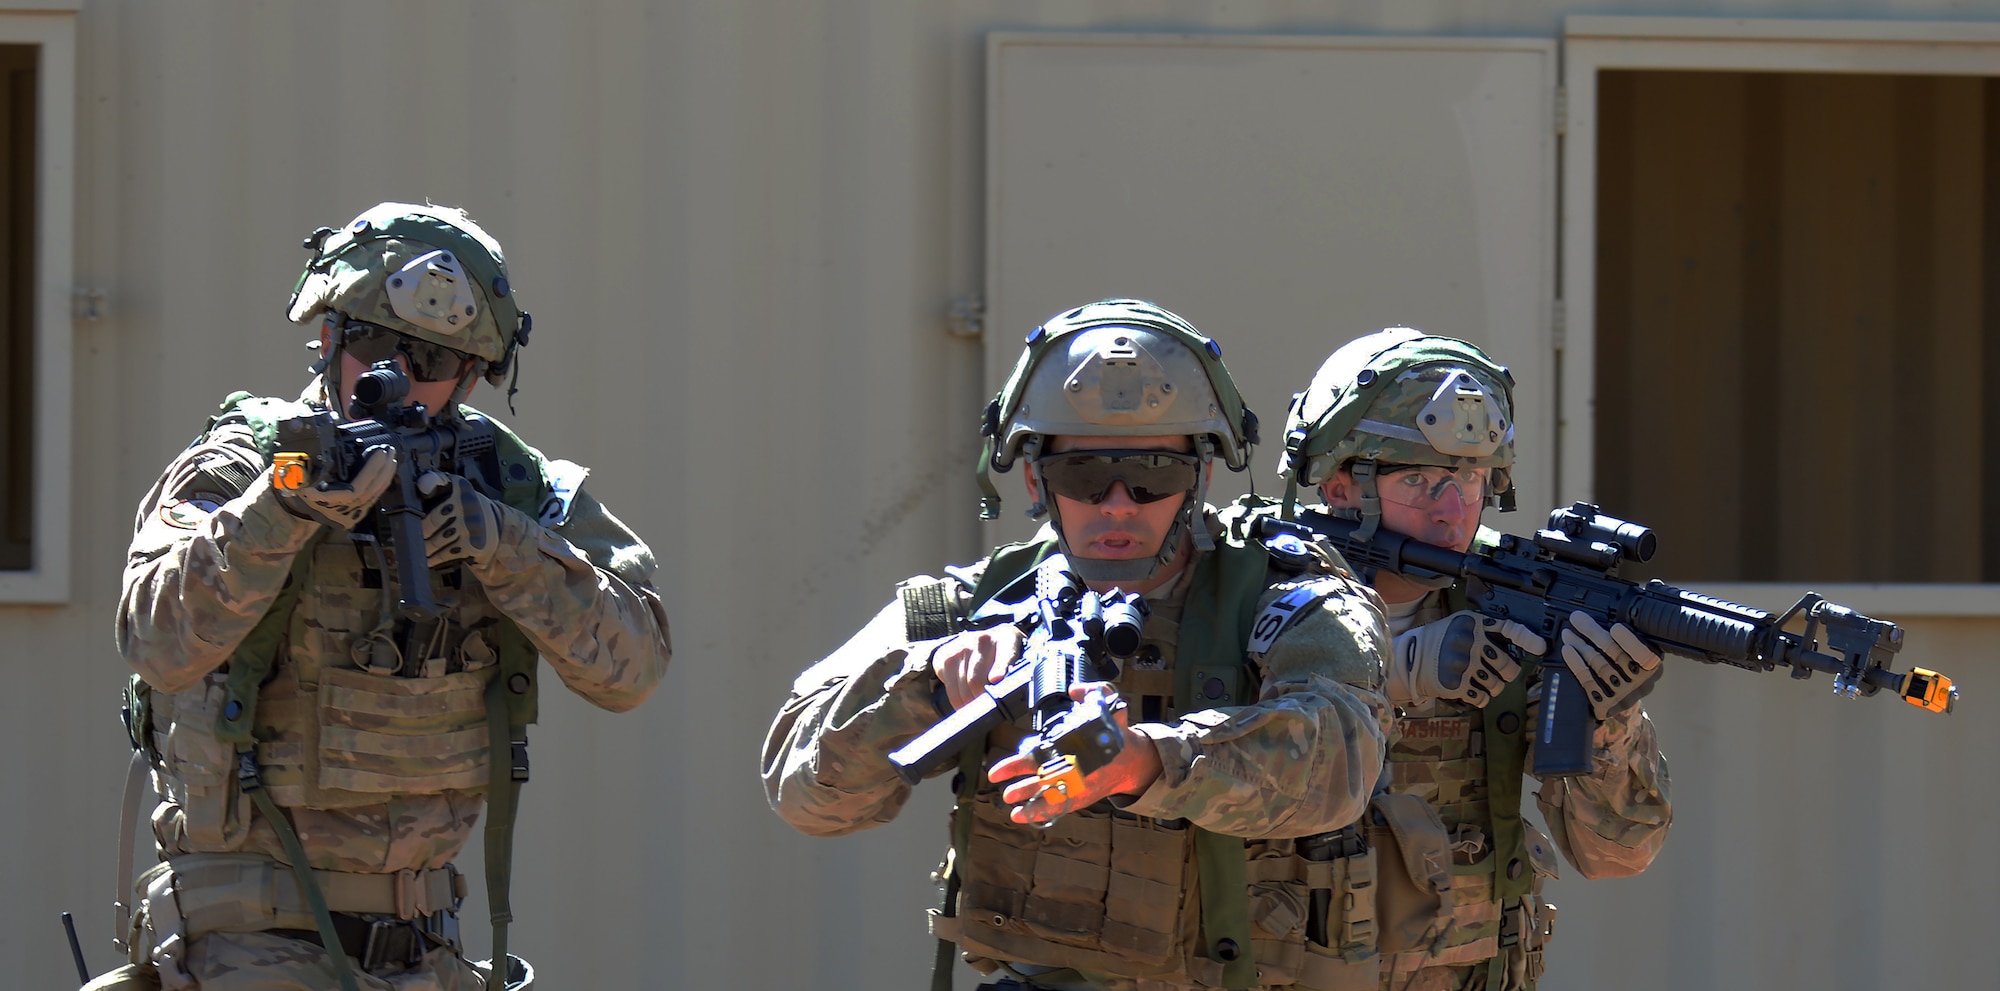 Airman 1st Class Riley Burges, Senior Airman Christian McGinnis, and 2nt Lt. Michael Thrasher, 90th Missile Wing, F.E. Warren Air Force Base, Wyo., move as a group towards a building Sept. 24, 2015, during the tactical recapture portion of the 2015 Global Strike Challenge security forces competition on Camp Guernsey, Wyo. Teams relied on each other as they moved from building to building in order to watch for opposing forces and potential targets. (U.S. Air Force photo by Senior Airman Brandon Valle)